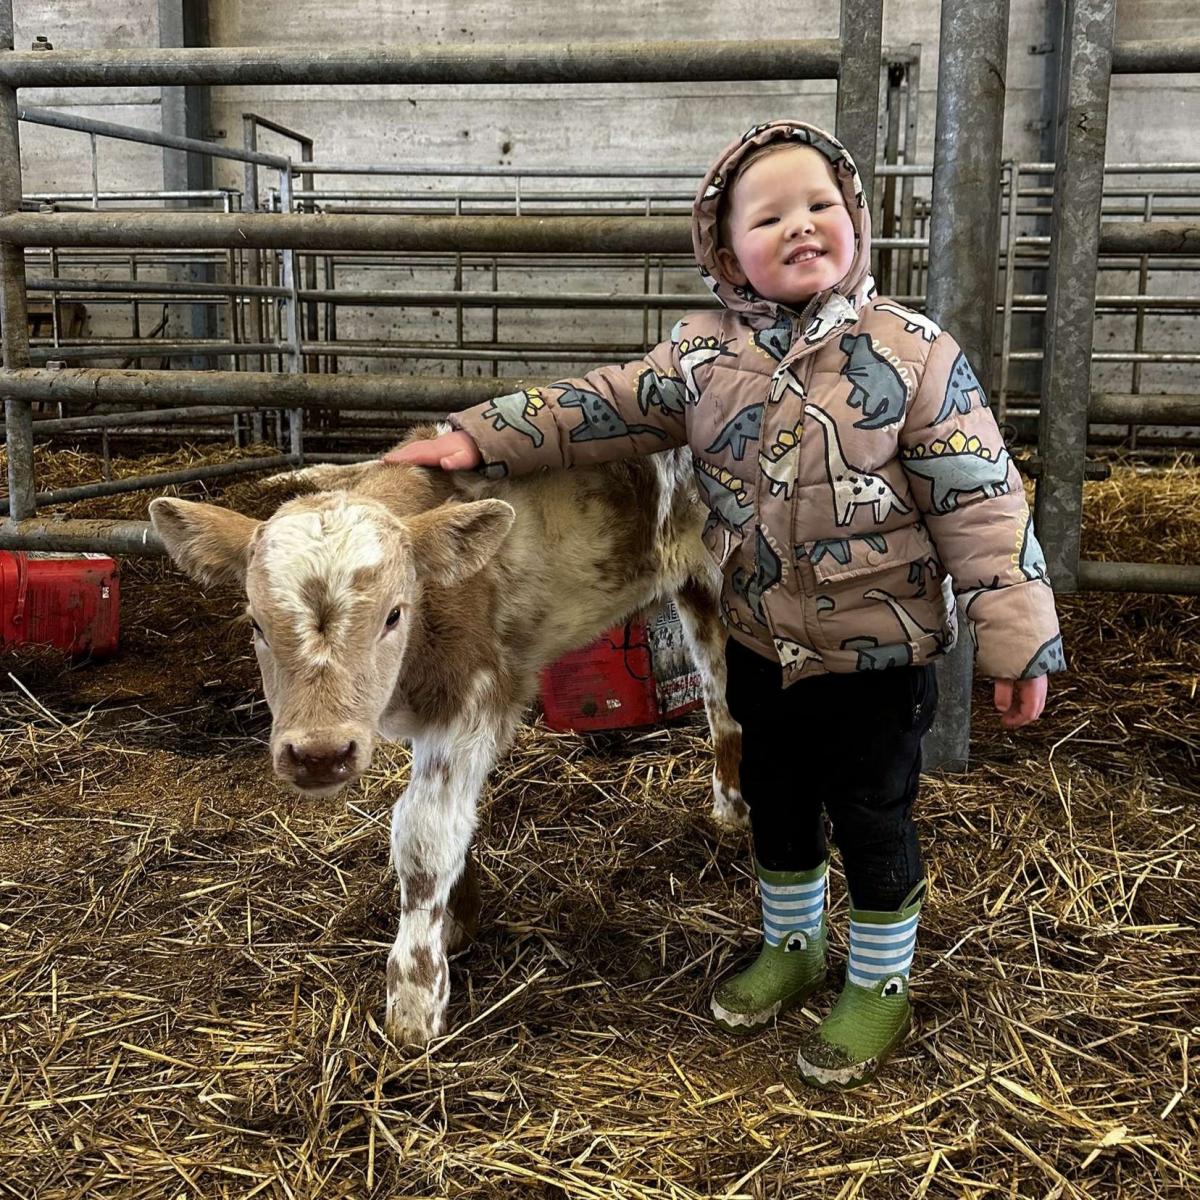 Sophie McCoy - My friends wee boy Brodie with his new pet calf called Lennie. He was in his element when he got to meet him and name the calf himself!